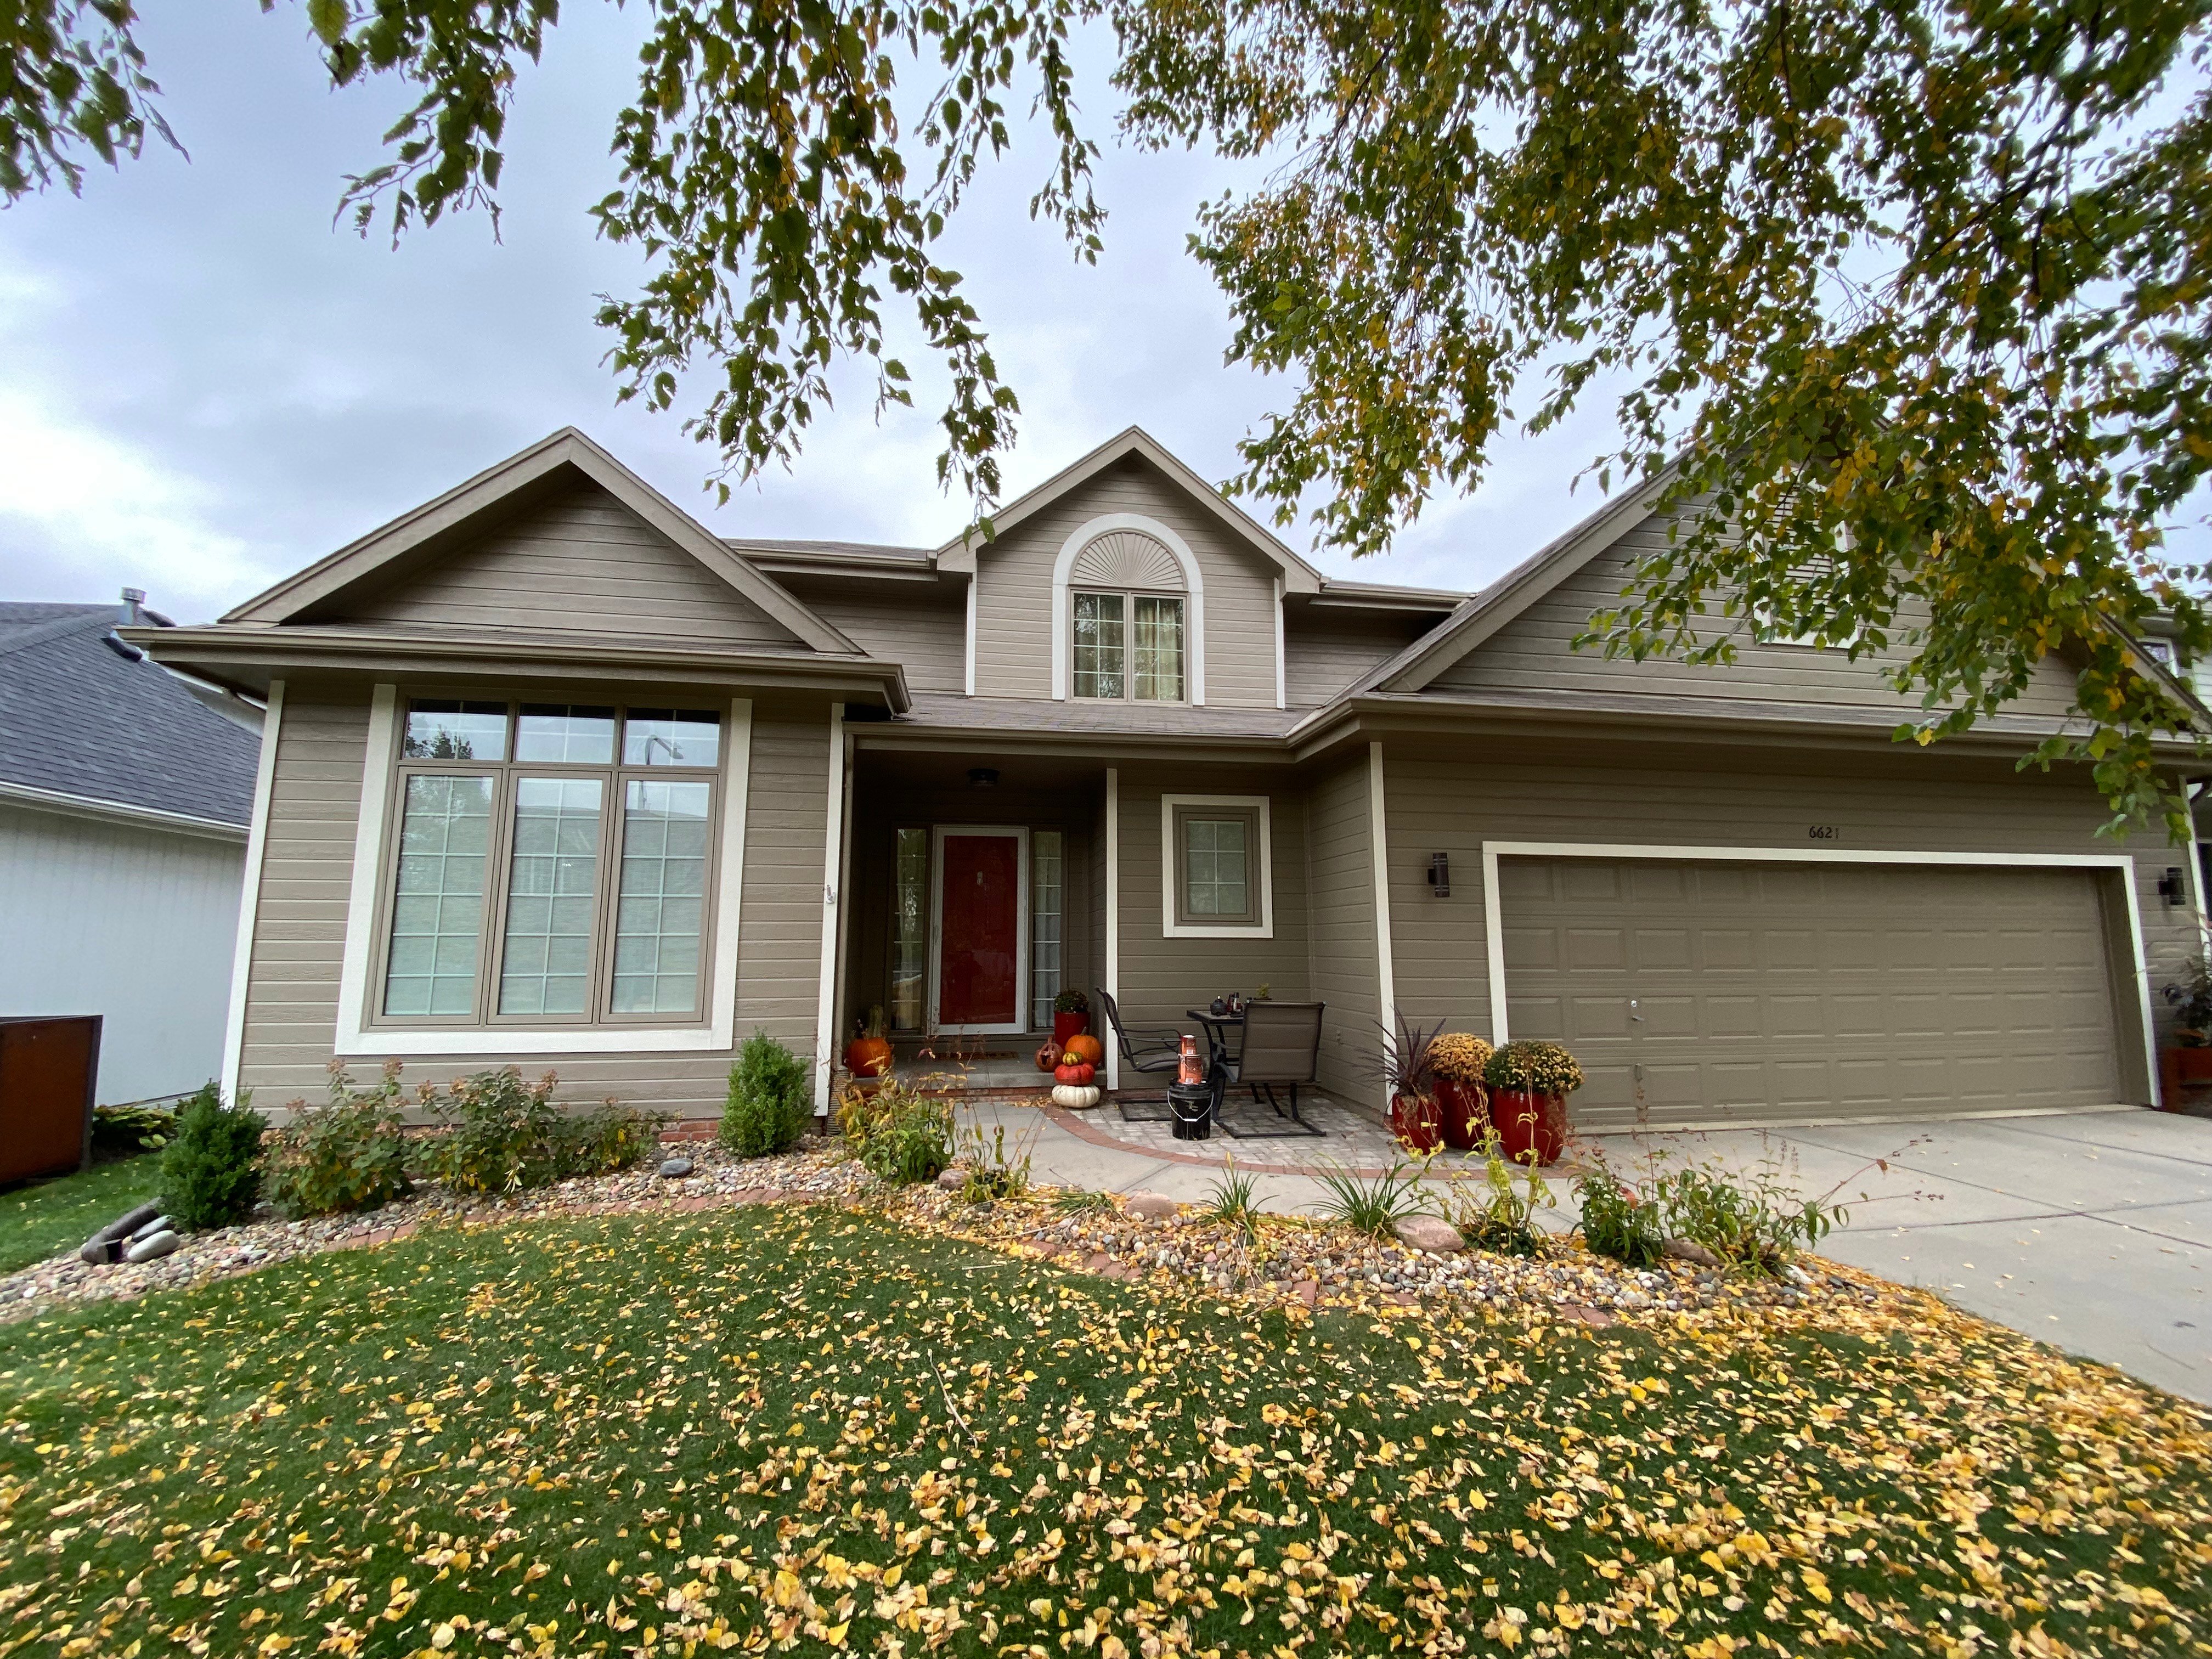 5 Advantages of Exterior Painting in the Fall